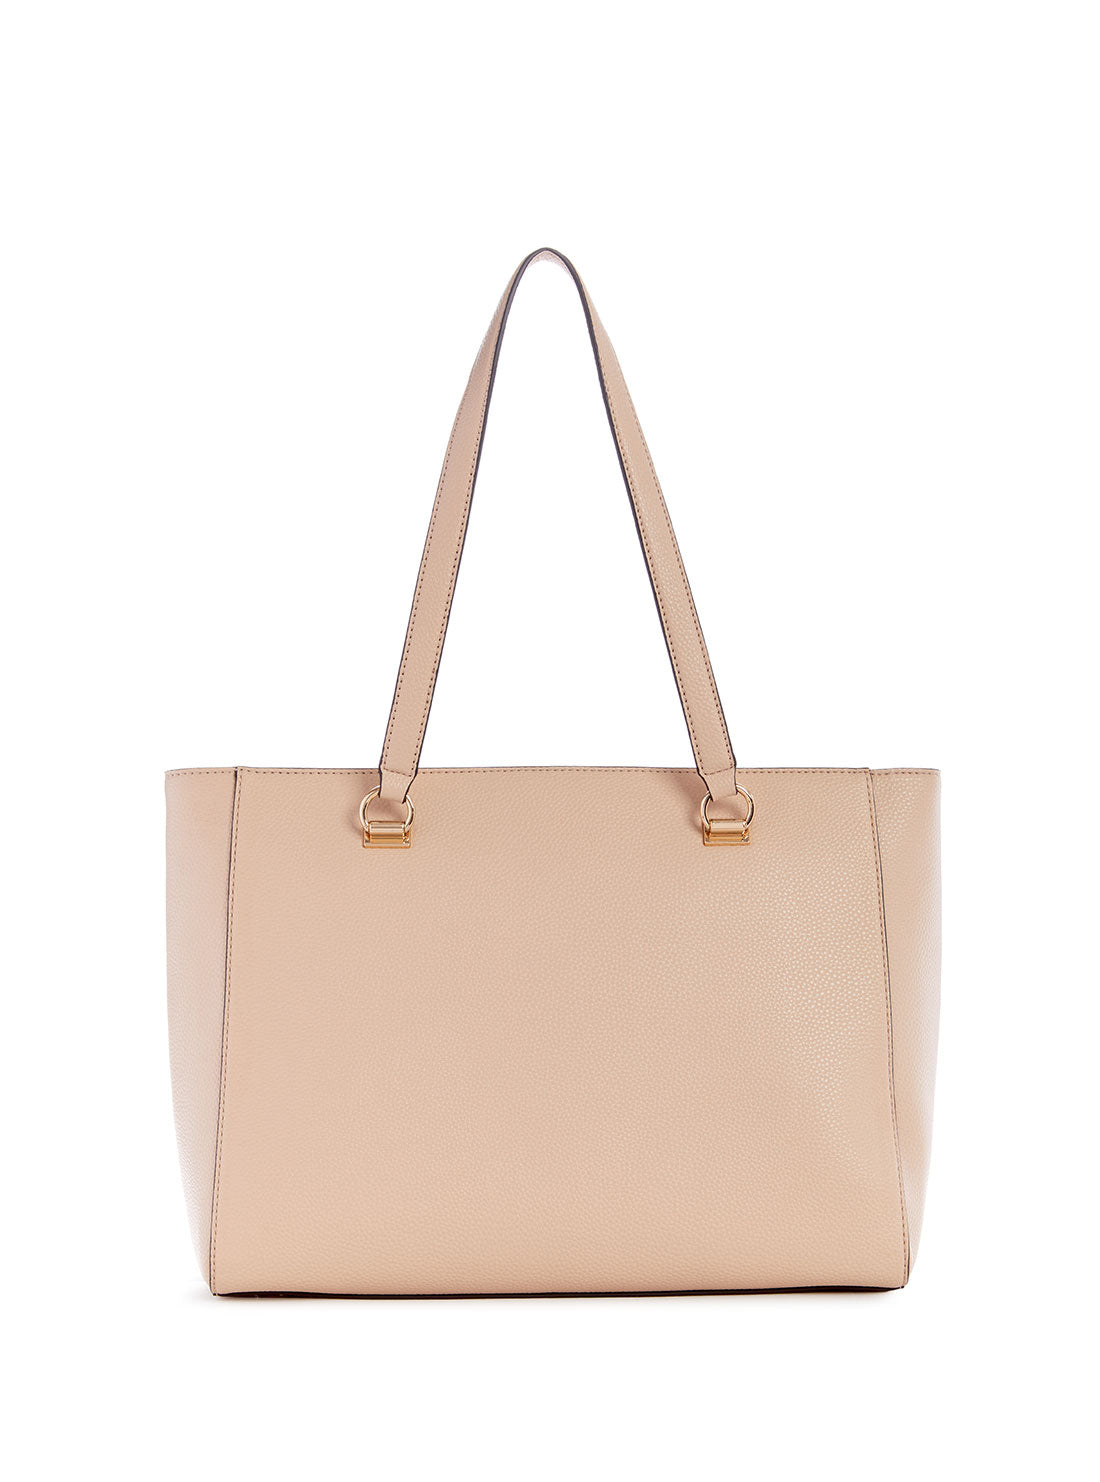 GUESS Women's Beige Taupe Emiliya Tote Bag back view